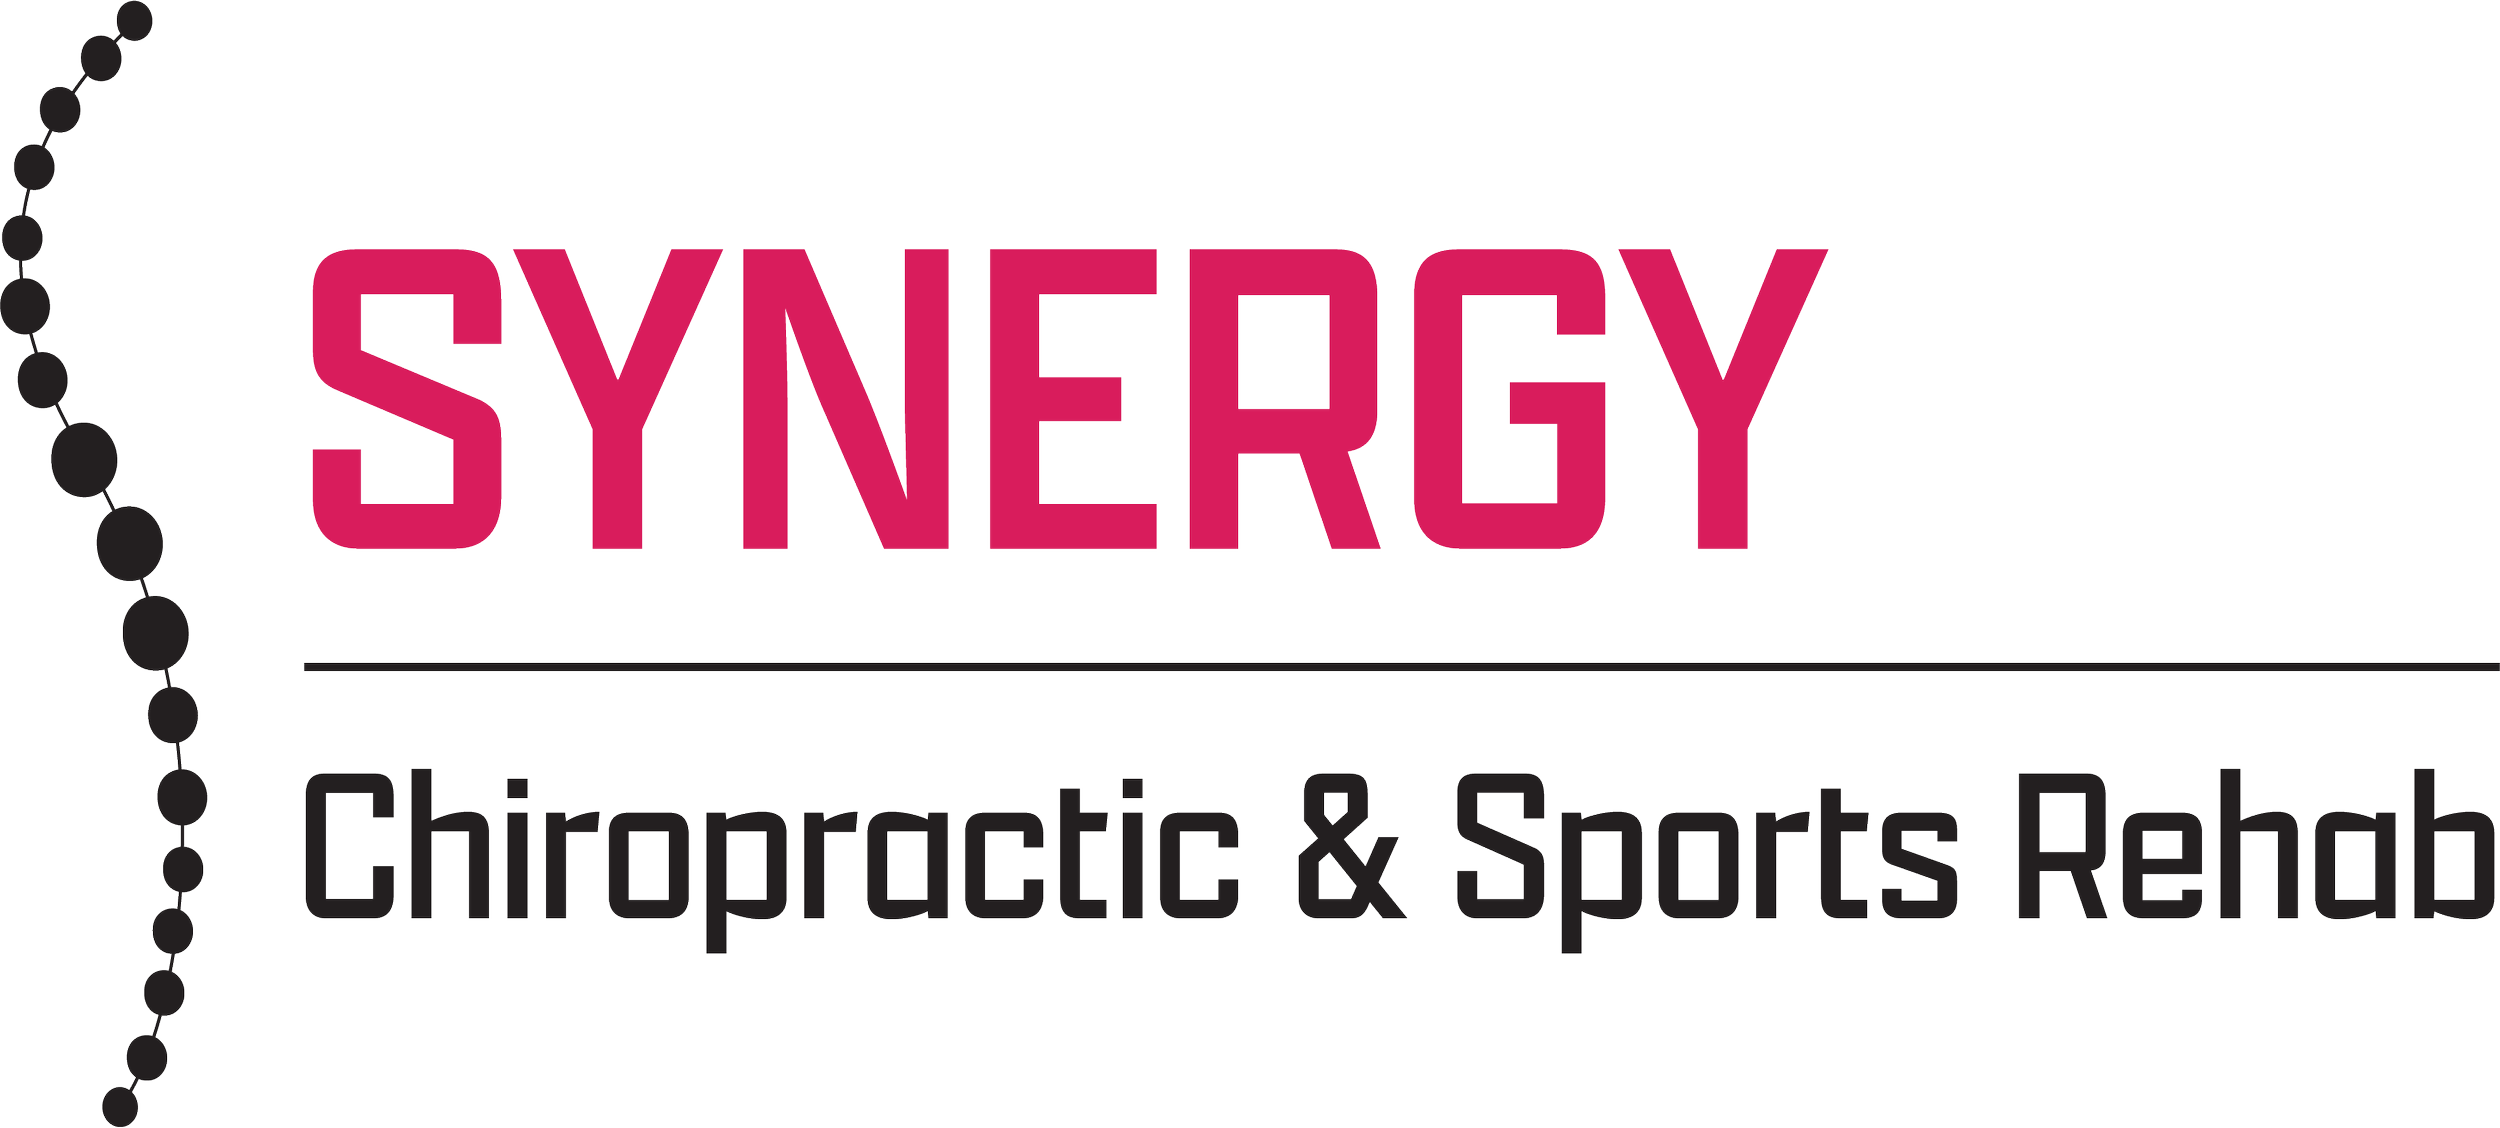 Synergy Chiropractic & Sports Rehab